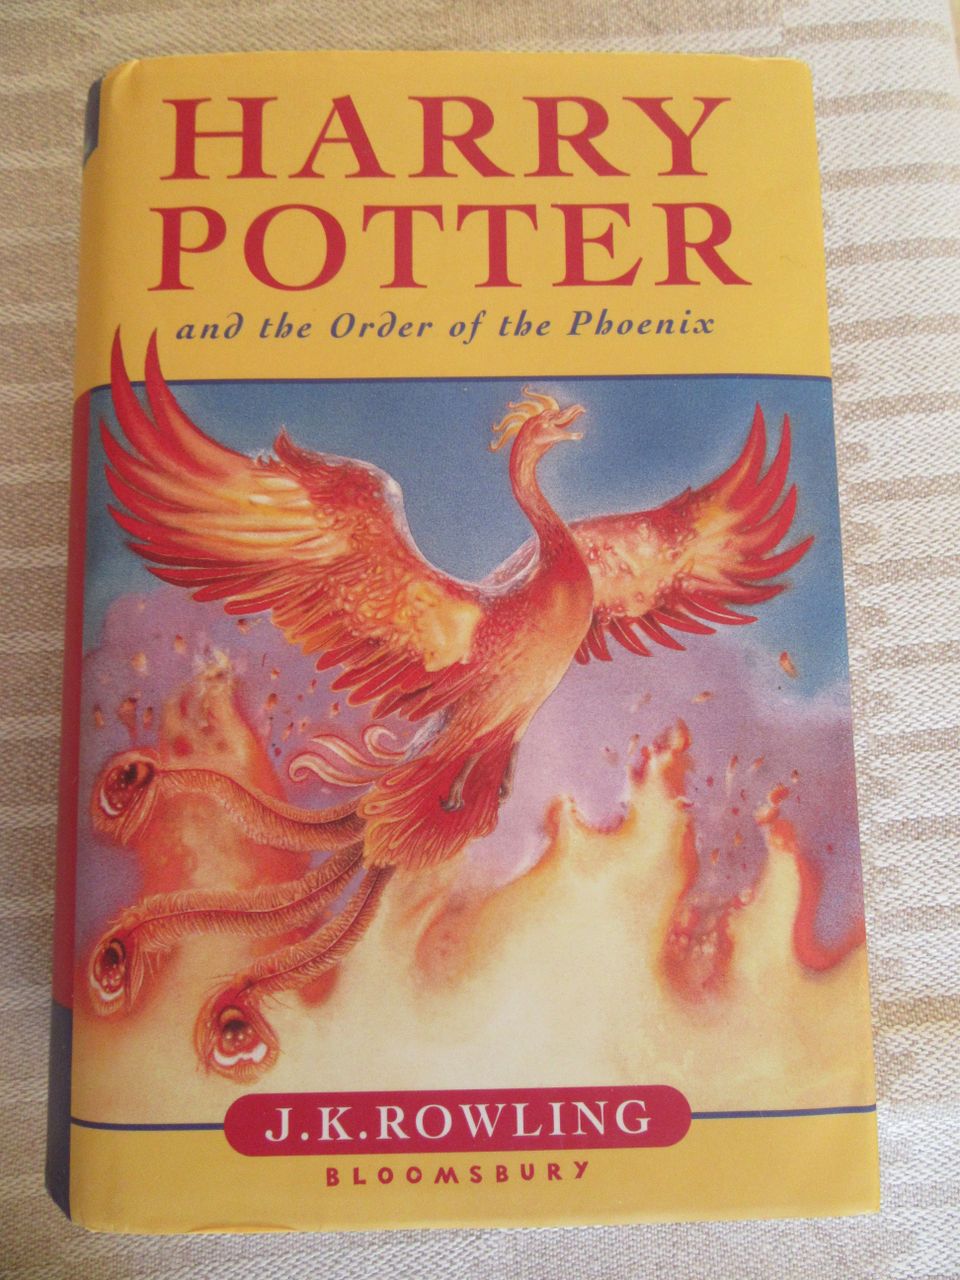 J.K.Rowling: HARRY POTTER and the Order of Phoenix